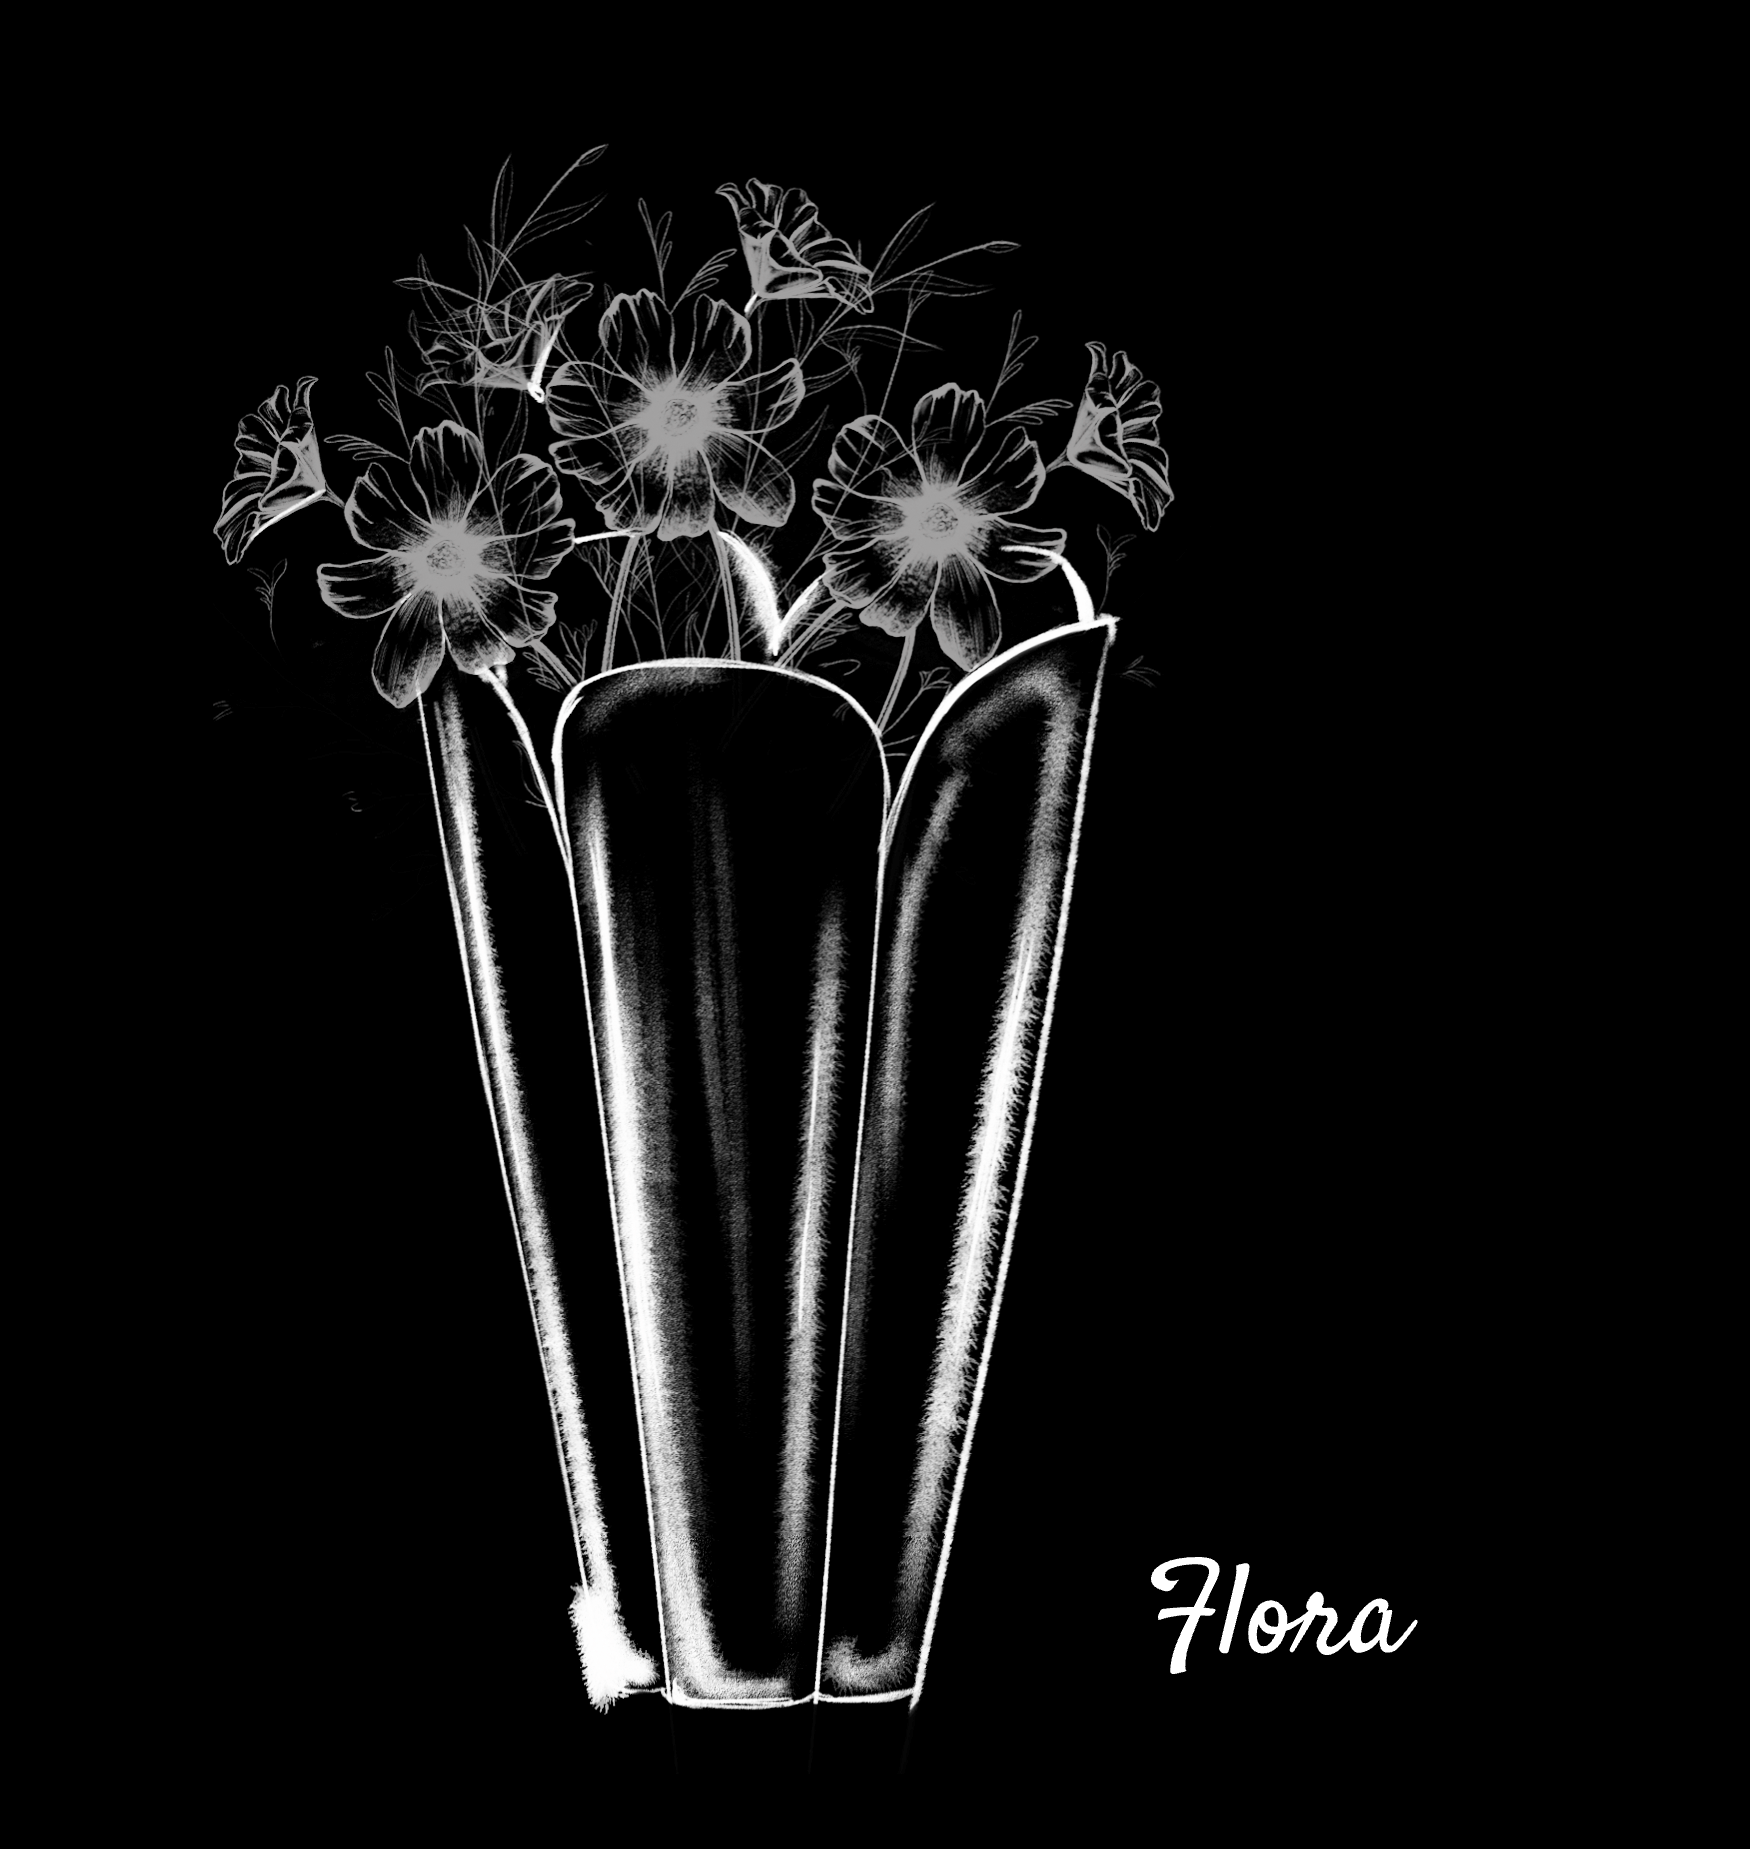 Black and white sketch of a metal Flora plant pot with flowers inside.